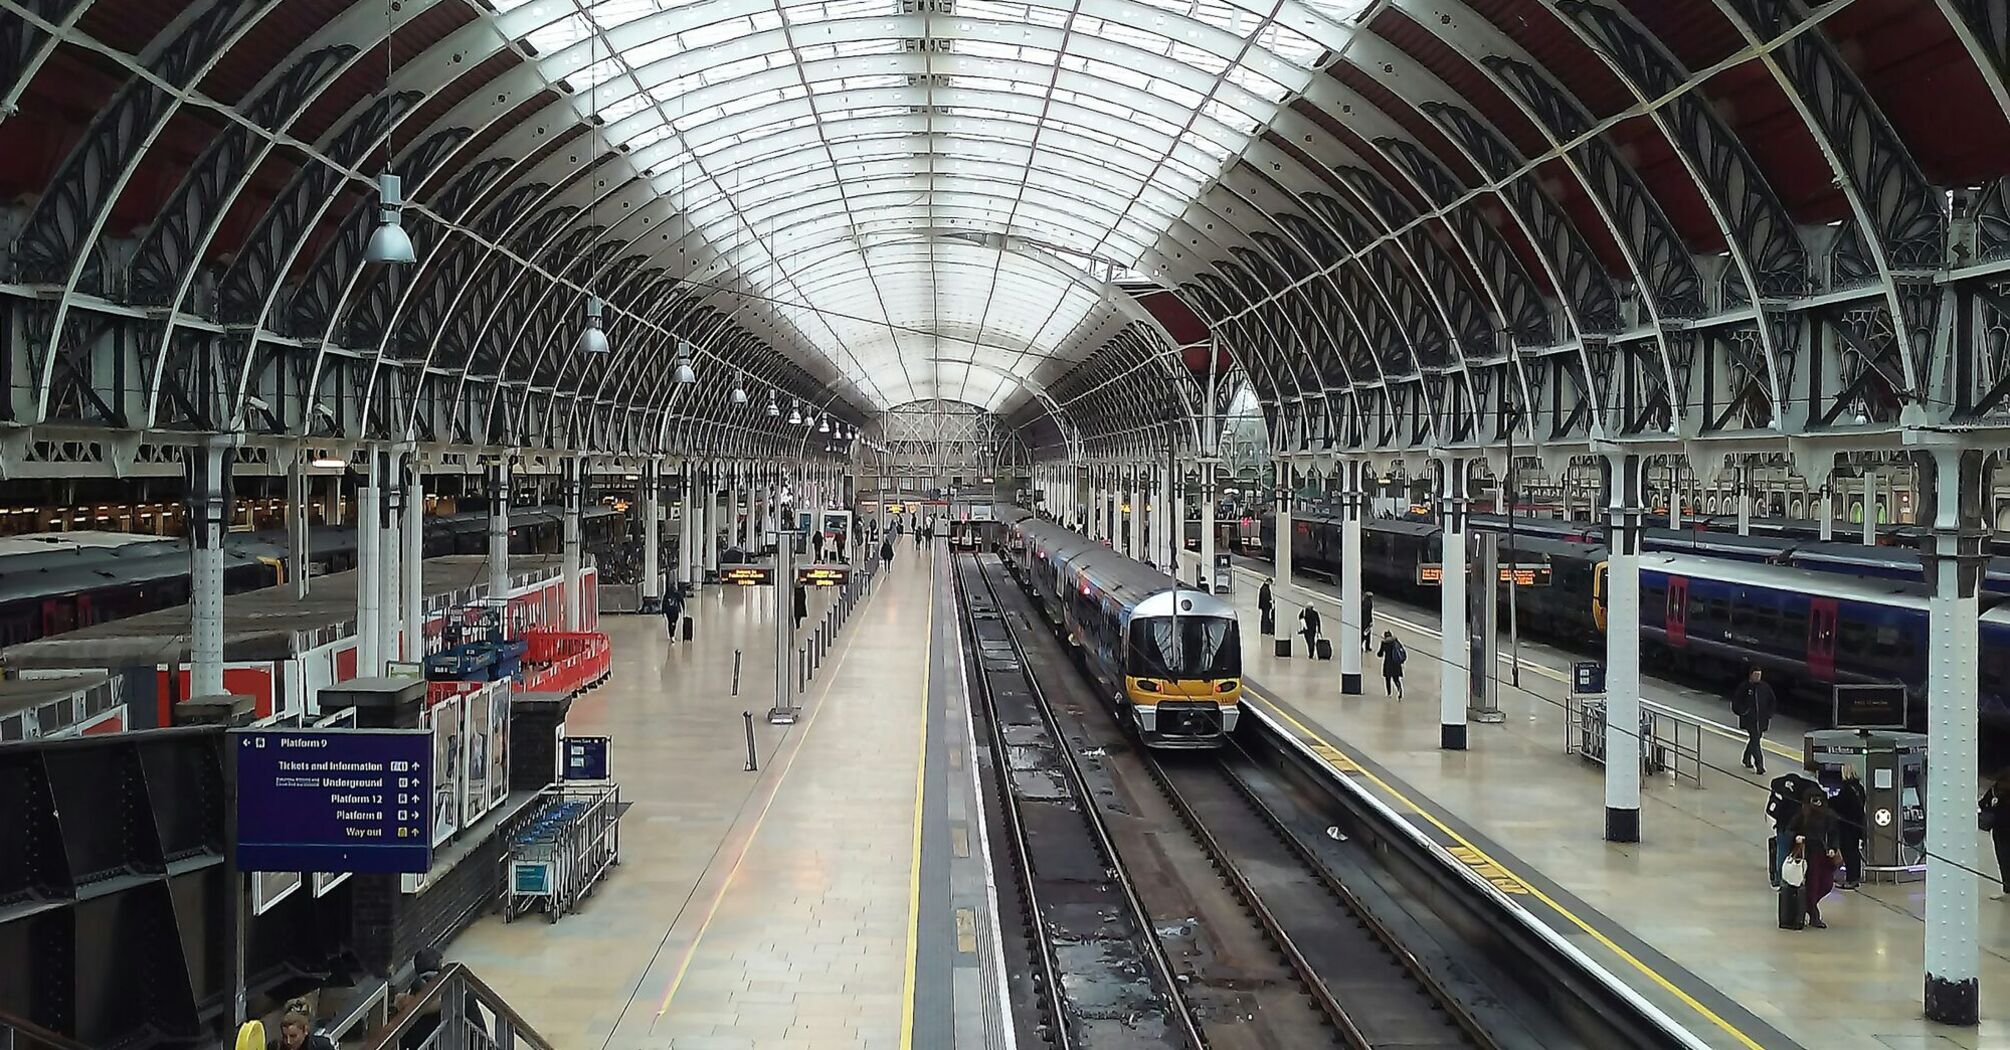 Interior view of a modern train station with a glass roof, showing platforms and trains ready for departure